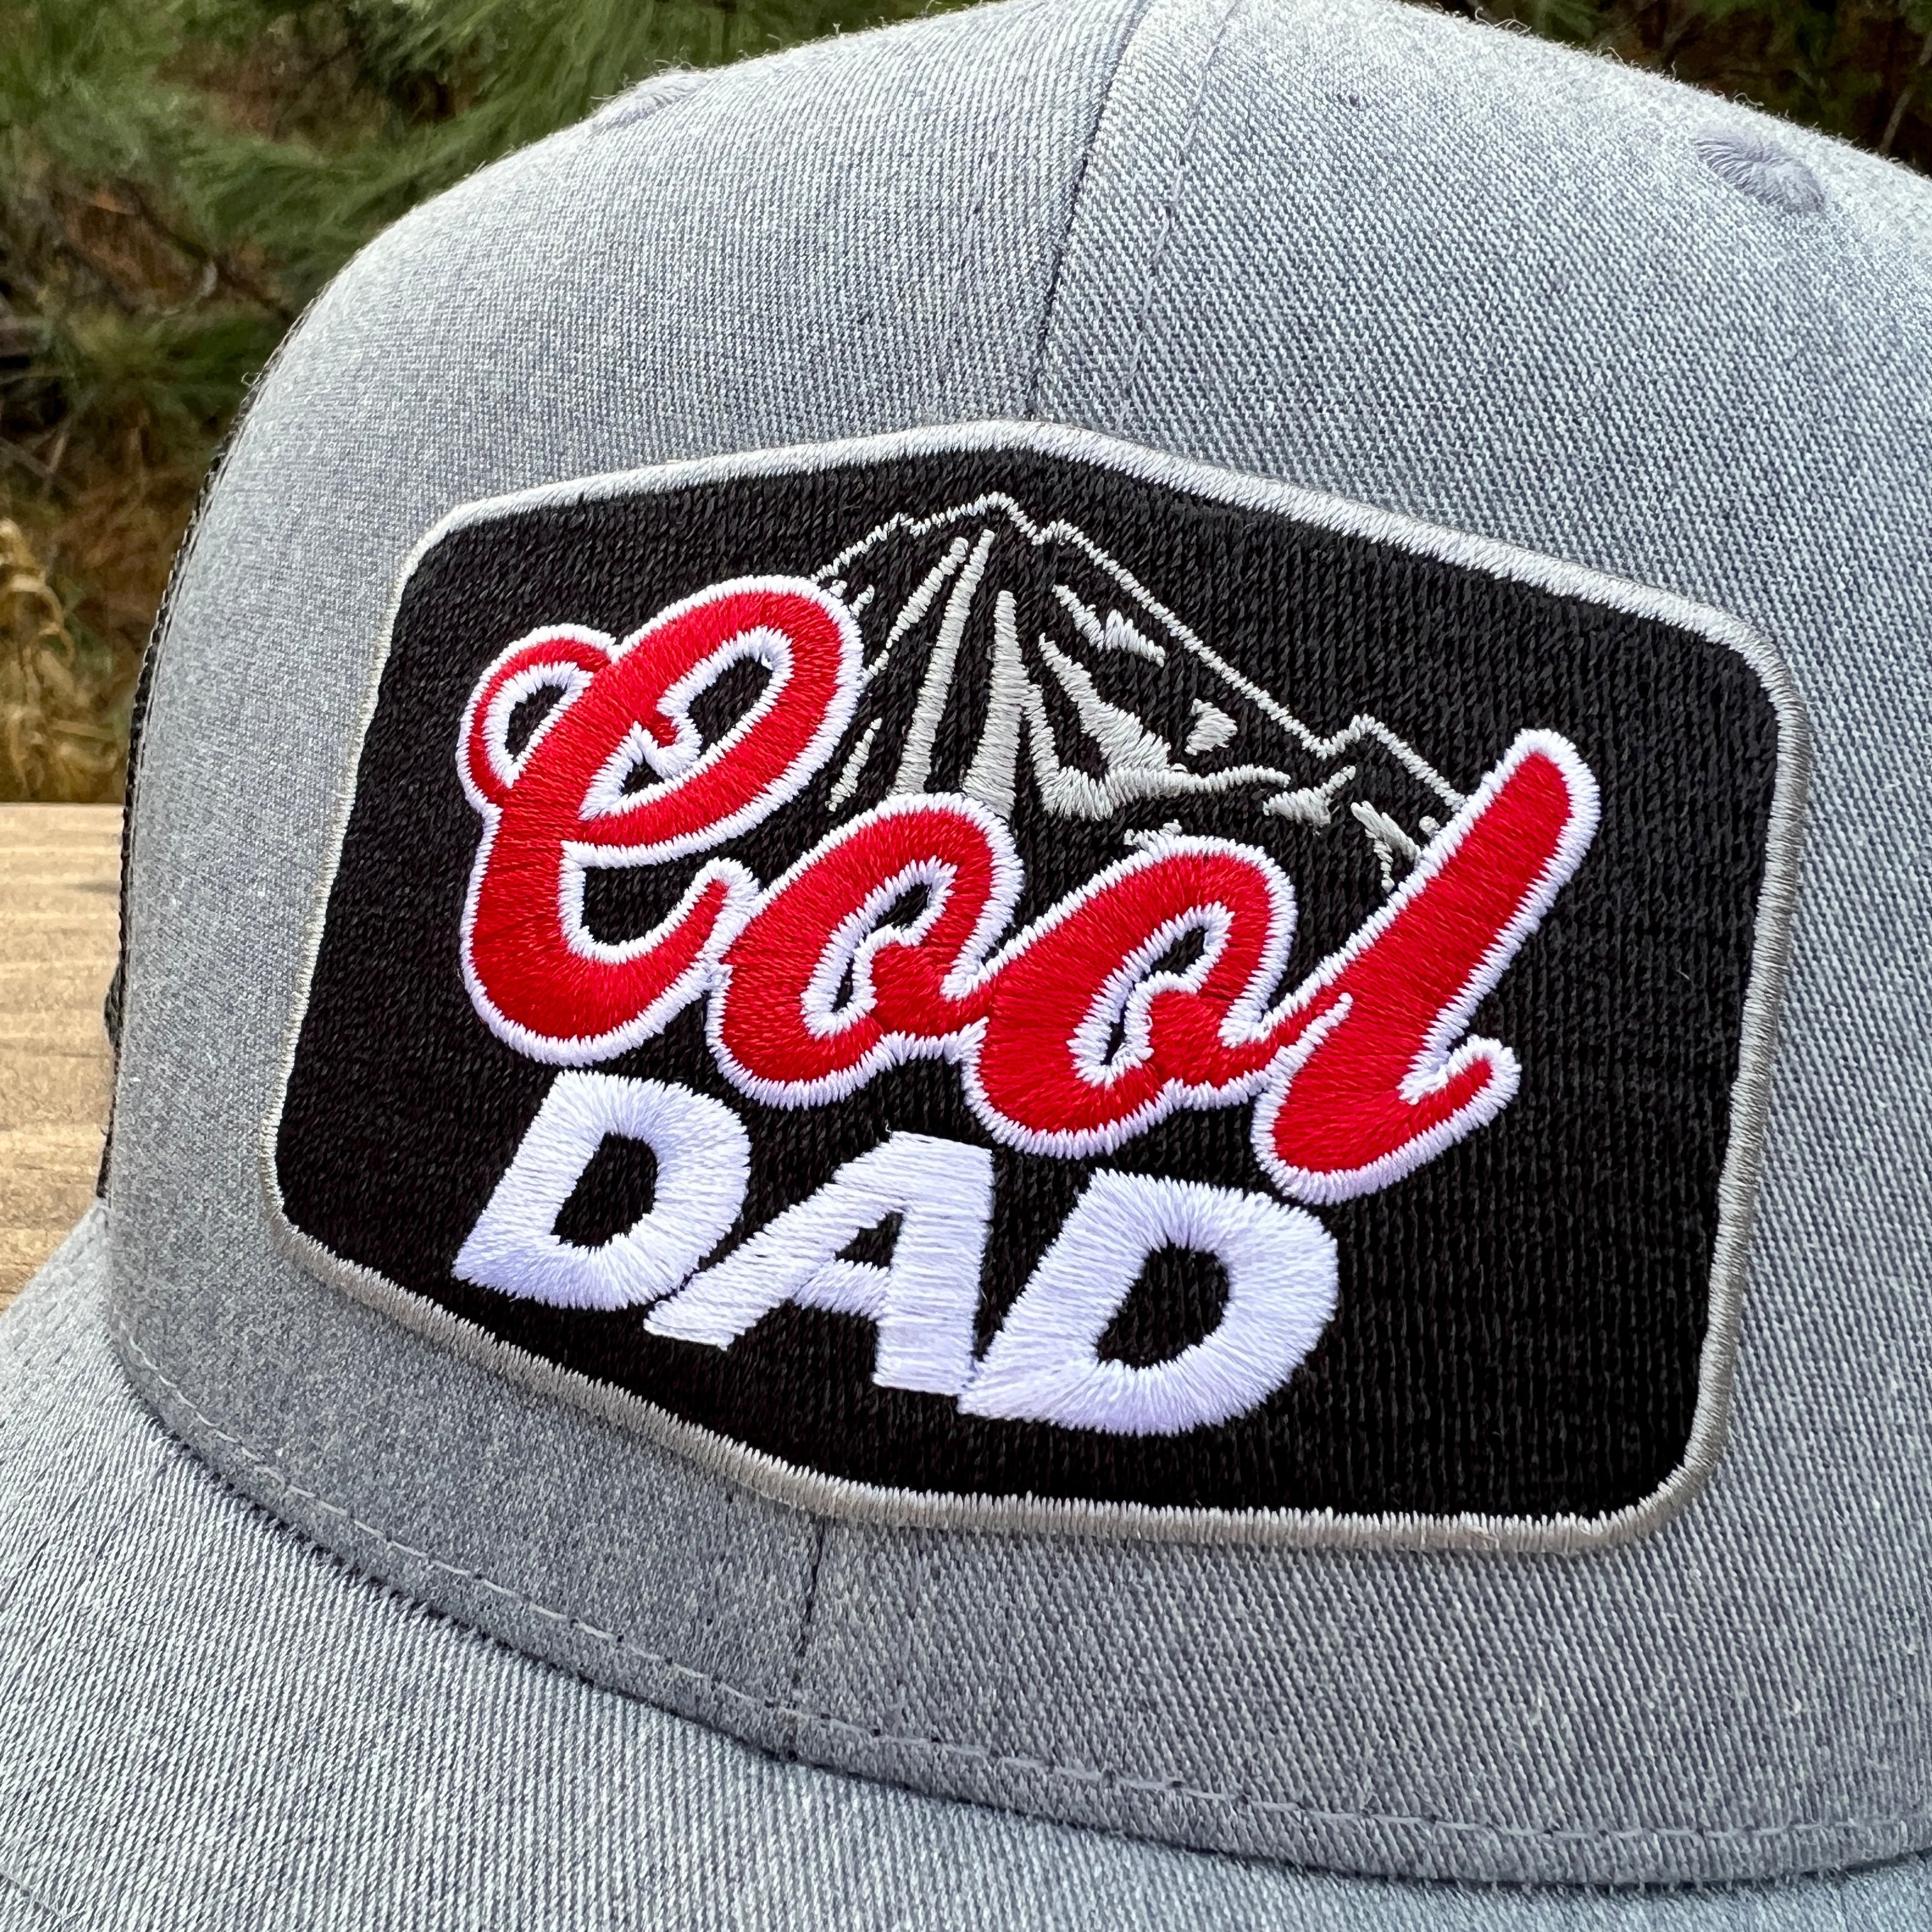 Cool Dad Hat - Fathers Day-Hats-208 Tees Wholesale, Idaho